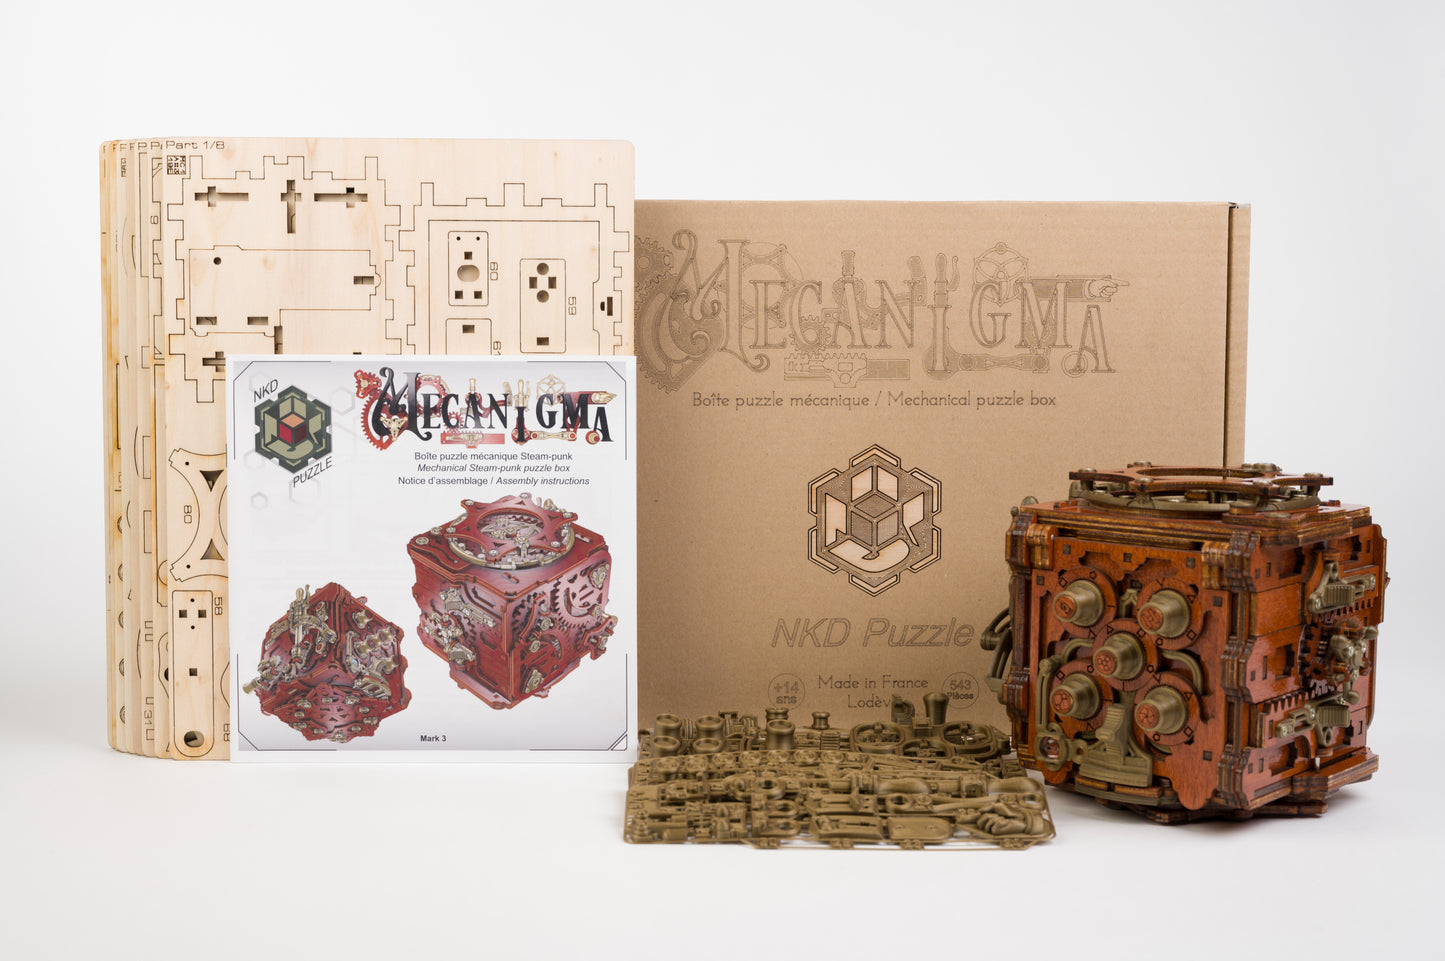 Mecanigma Kit - NKD Puzzle: The Ultimate Wooden Puzzle Experience